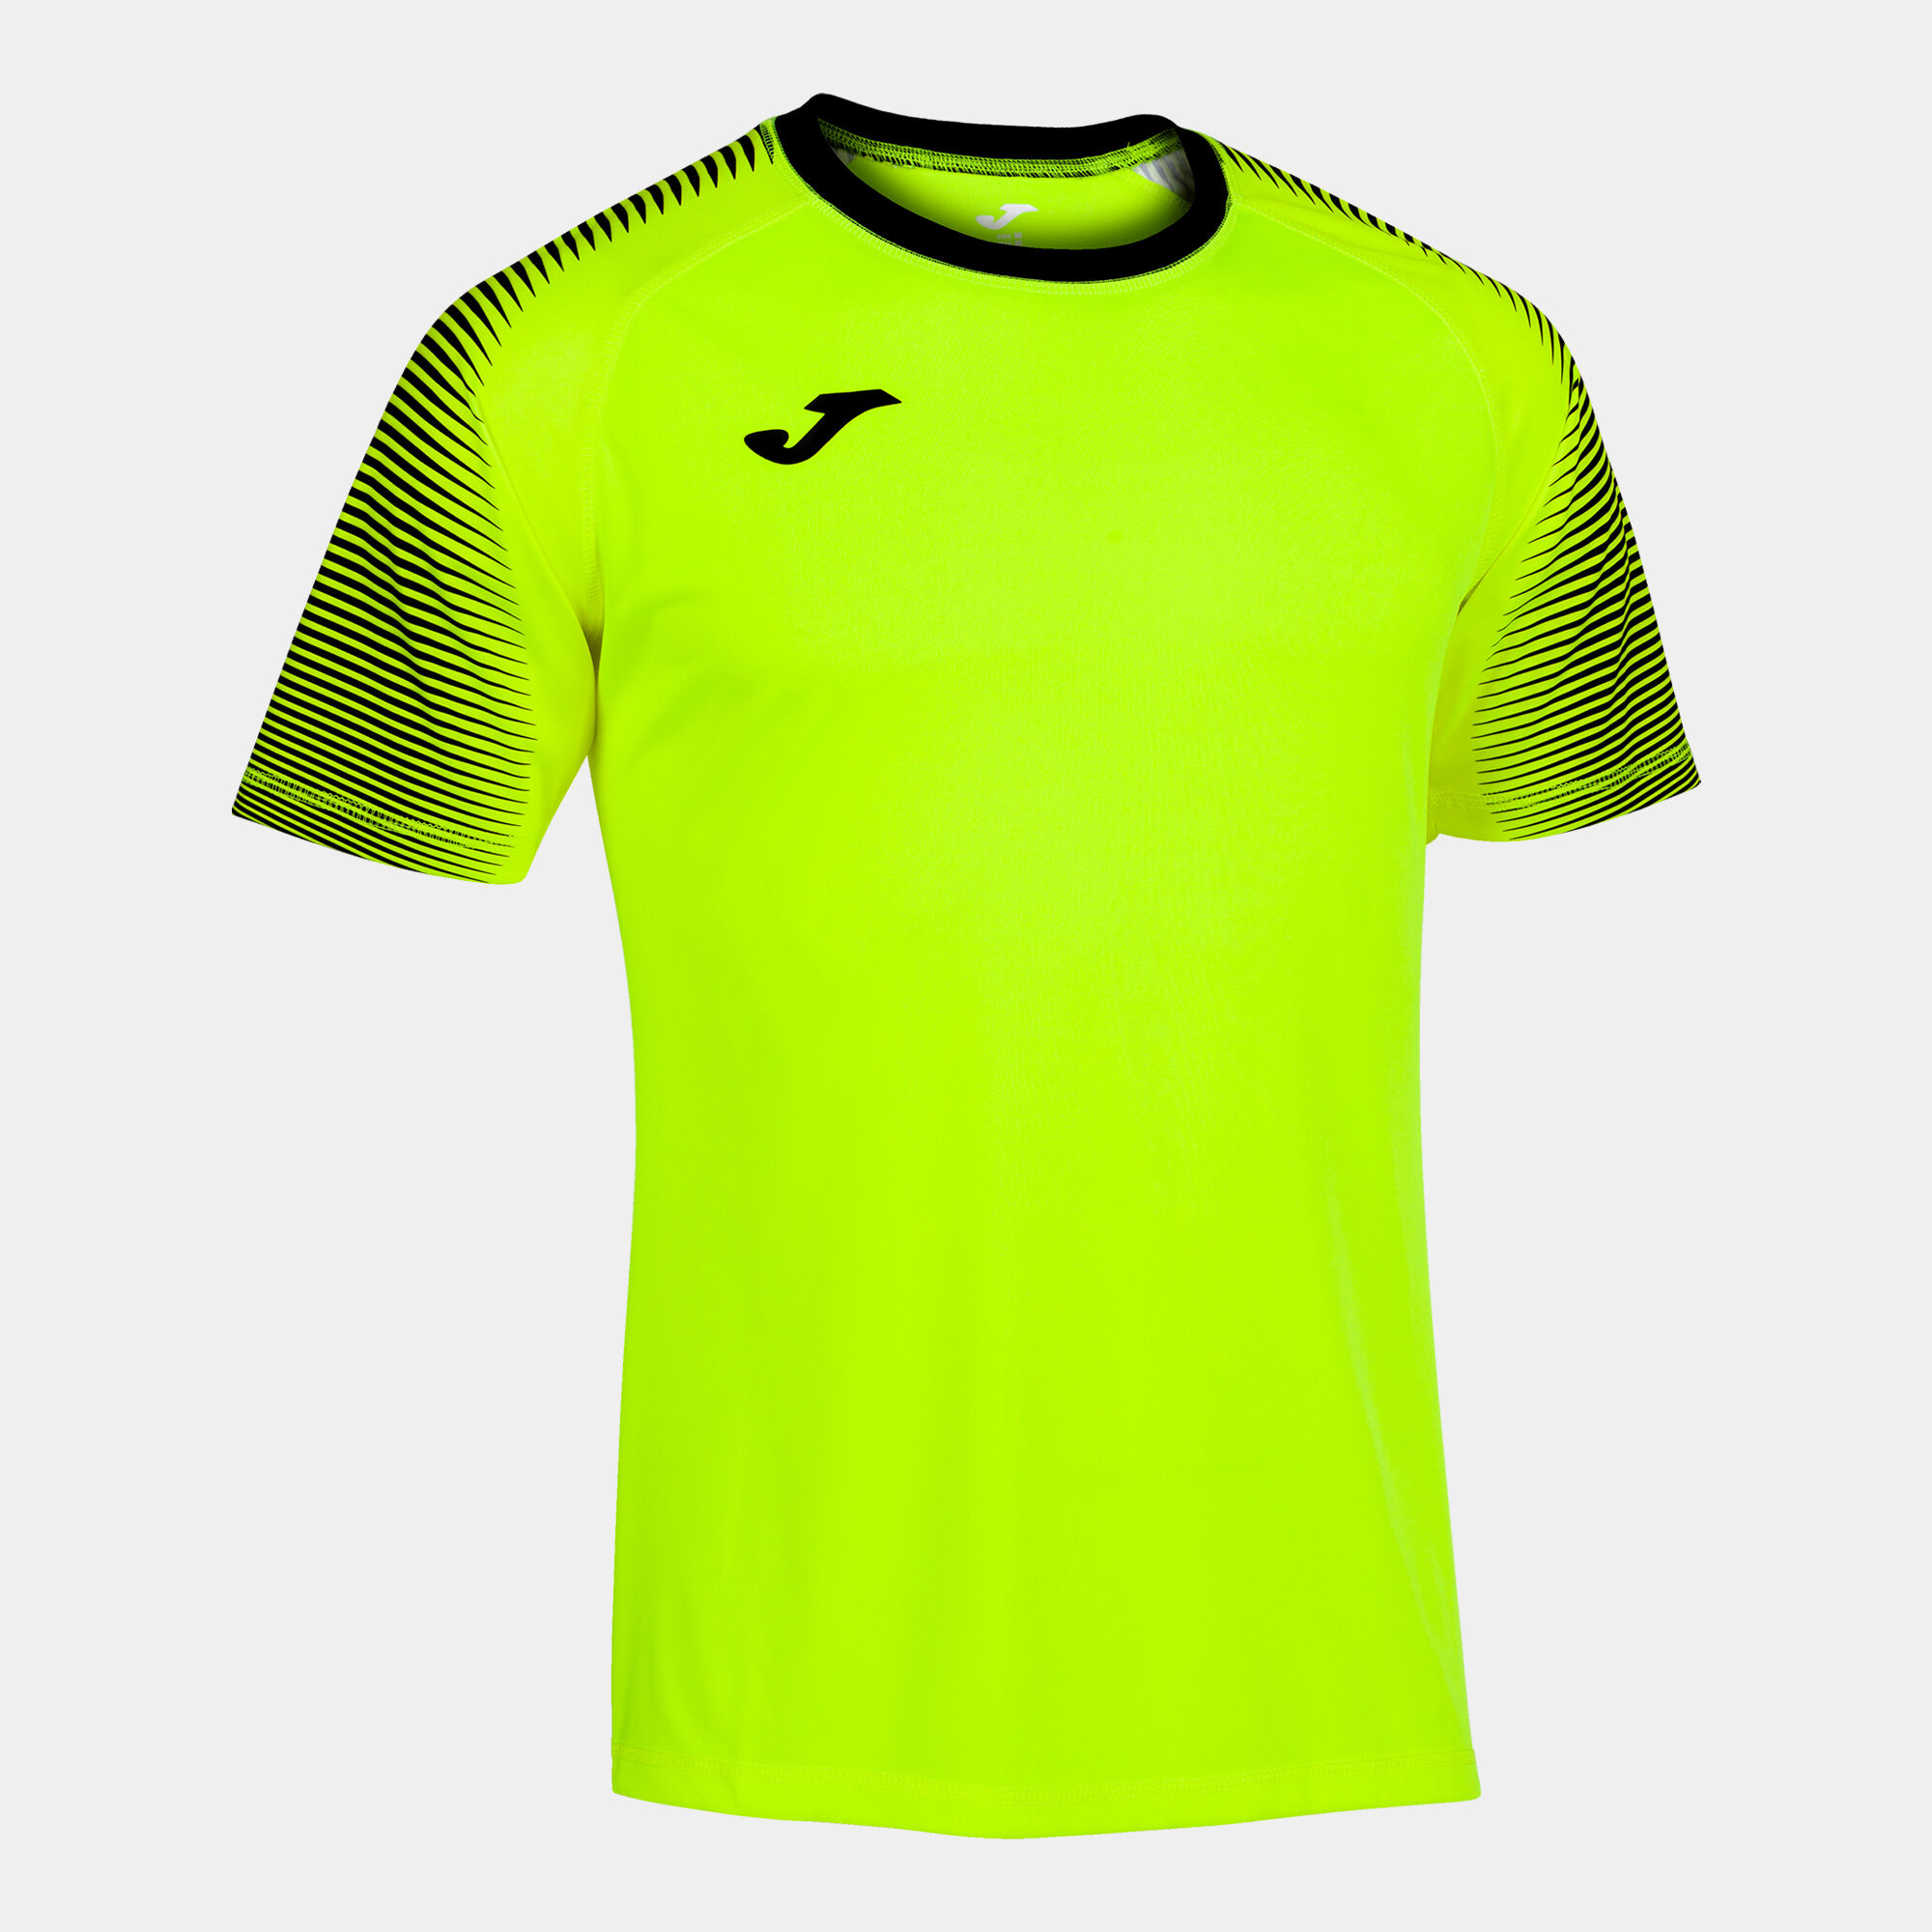 MAILLOT MANCHES COURTES HOMME HISPA III JAUNE FLUO